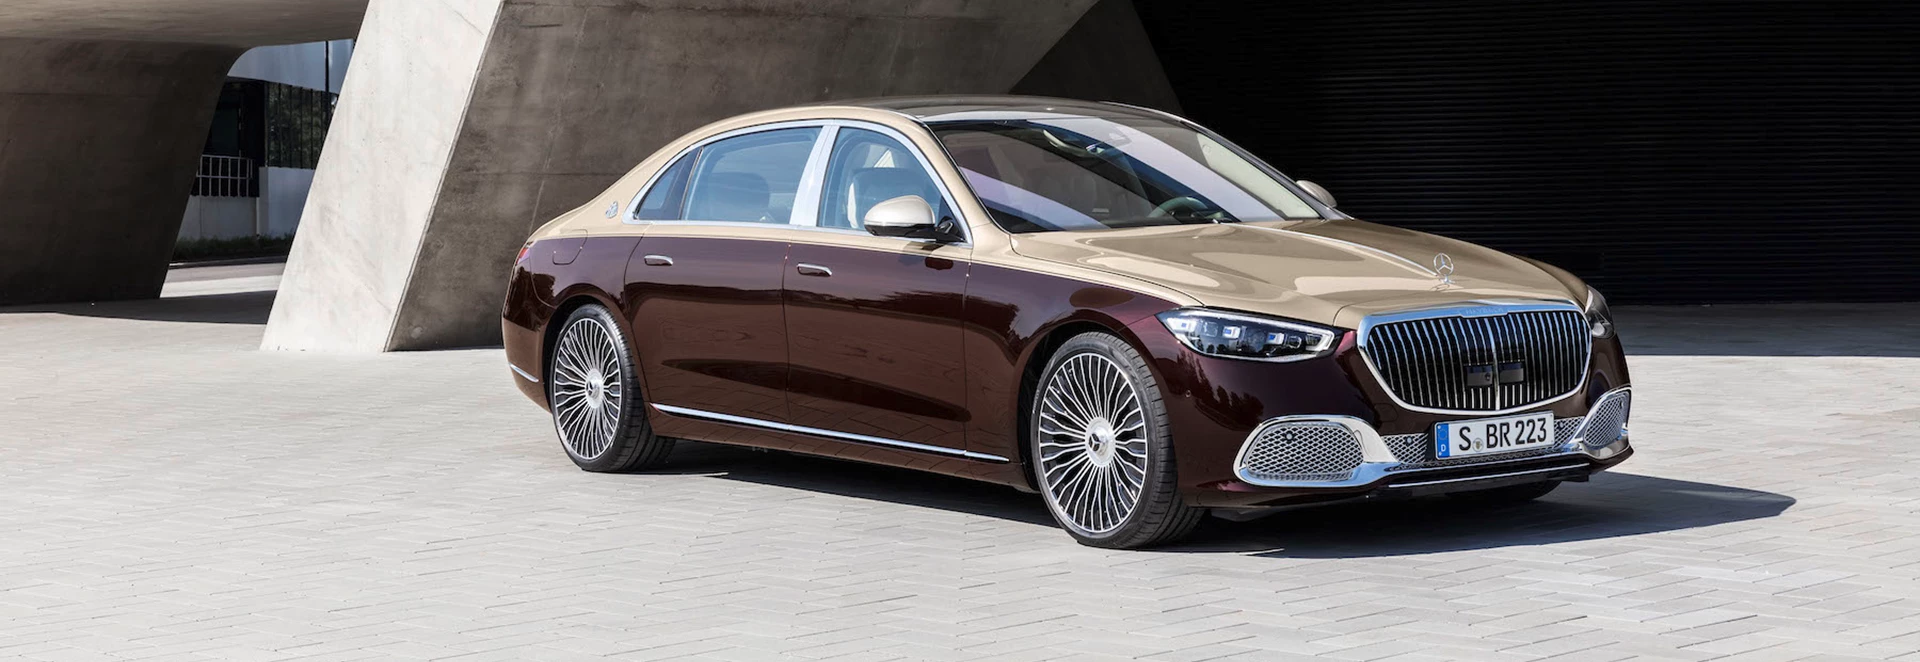 Mercedes-Maybach S-Class unveiled as new luxury flagship 